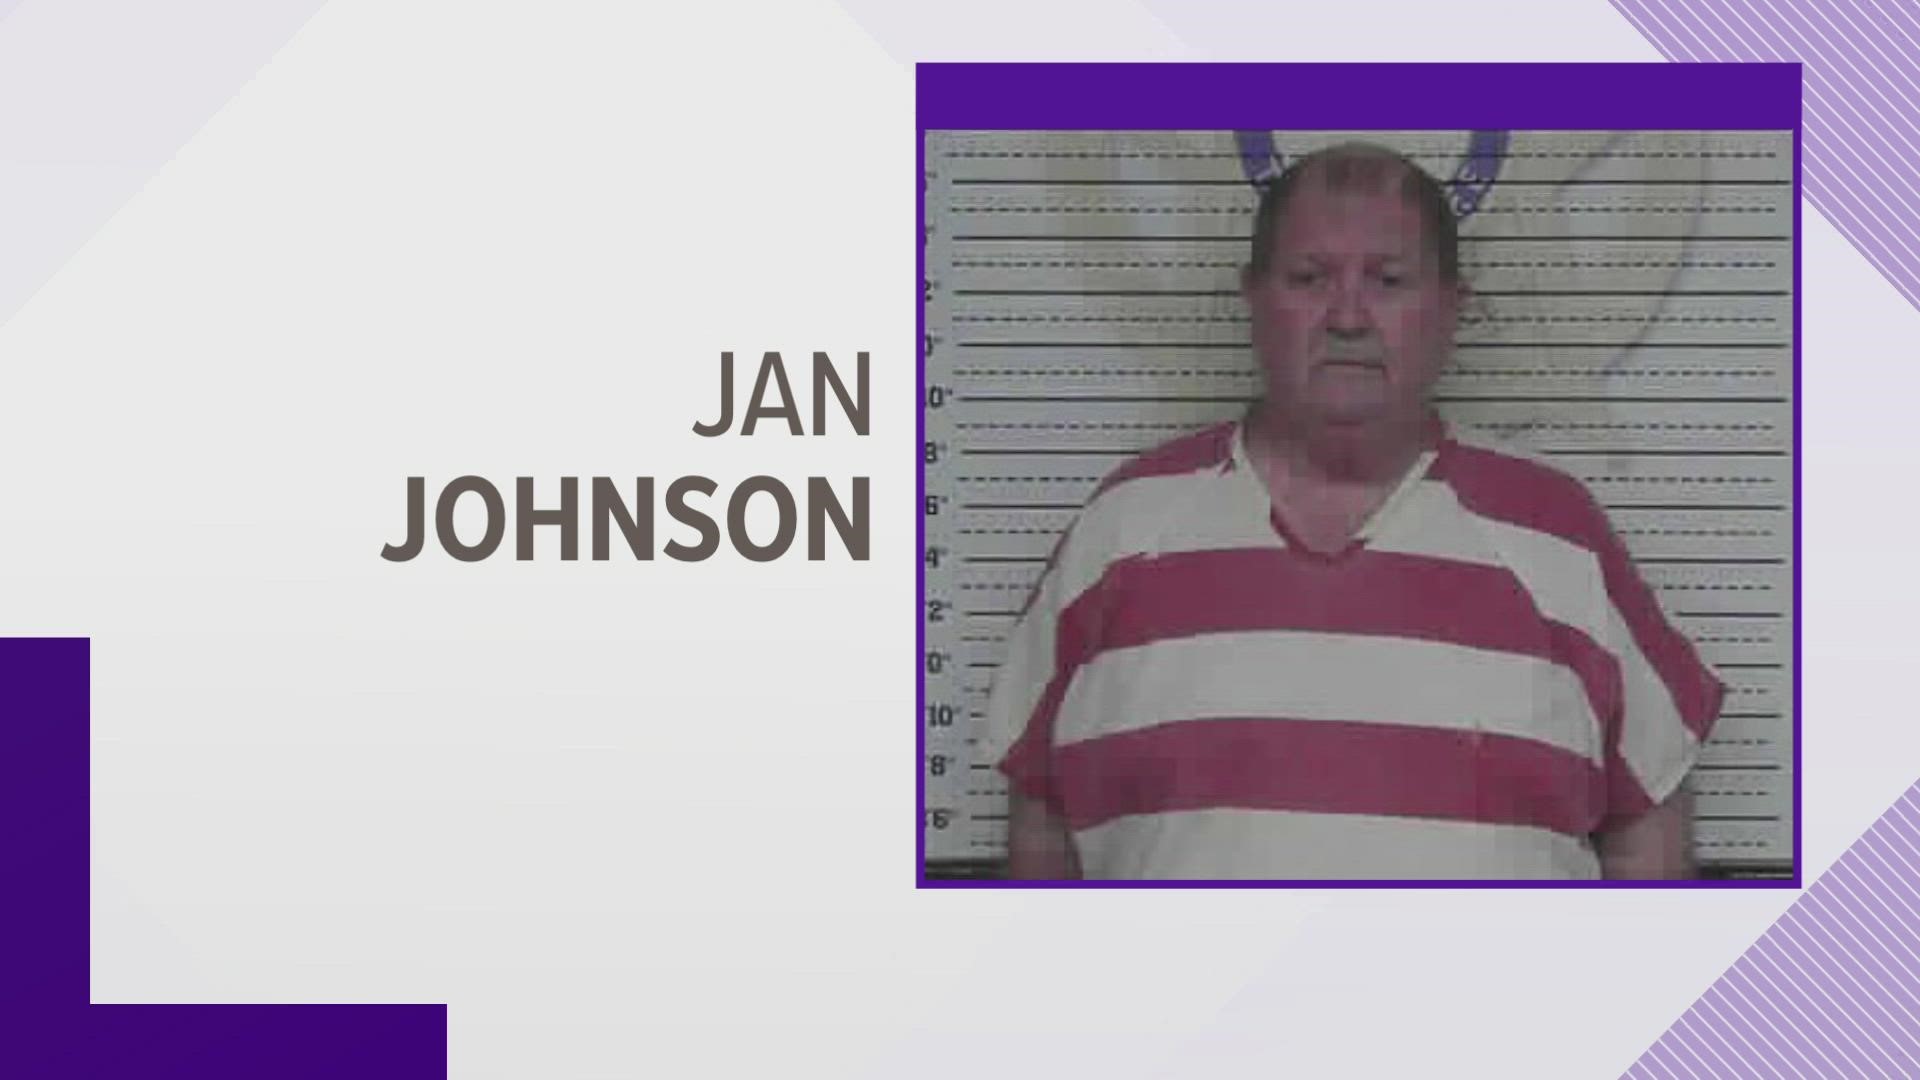 Officers say Jan Johnson was angry and shot his wife on Sunday morning.